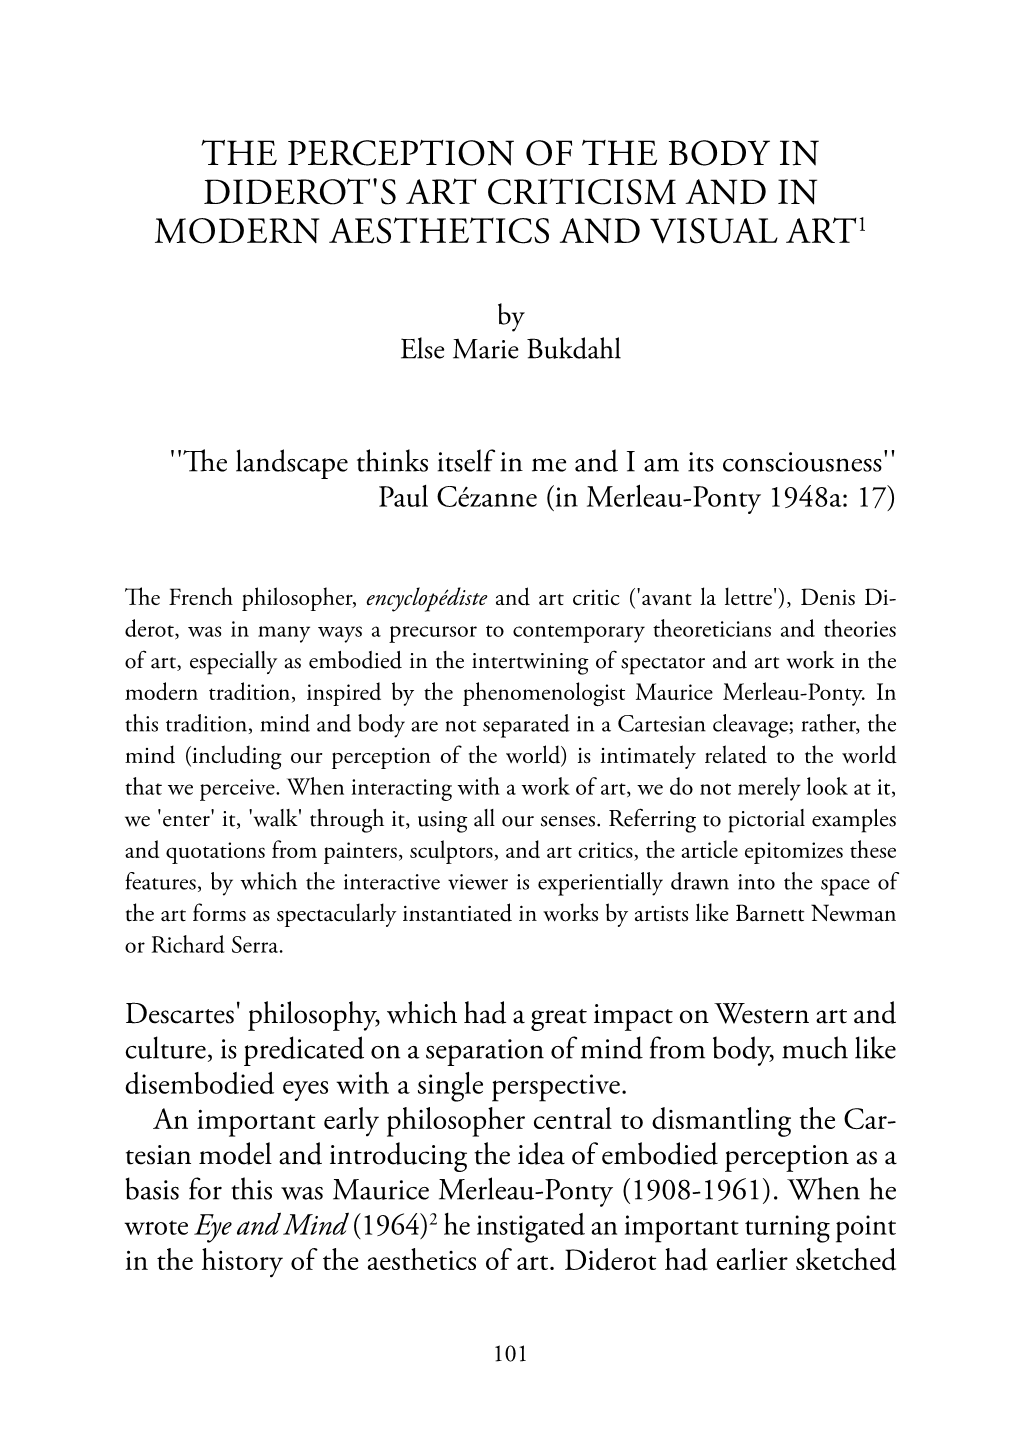 The Perception of the Body in Diderot's Art Criticism and in Modern Aesthetics and Visual Art1